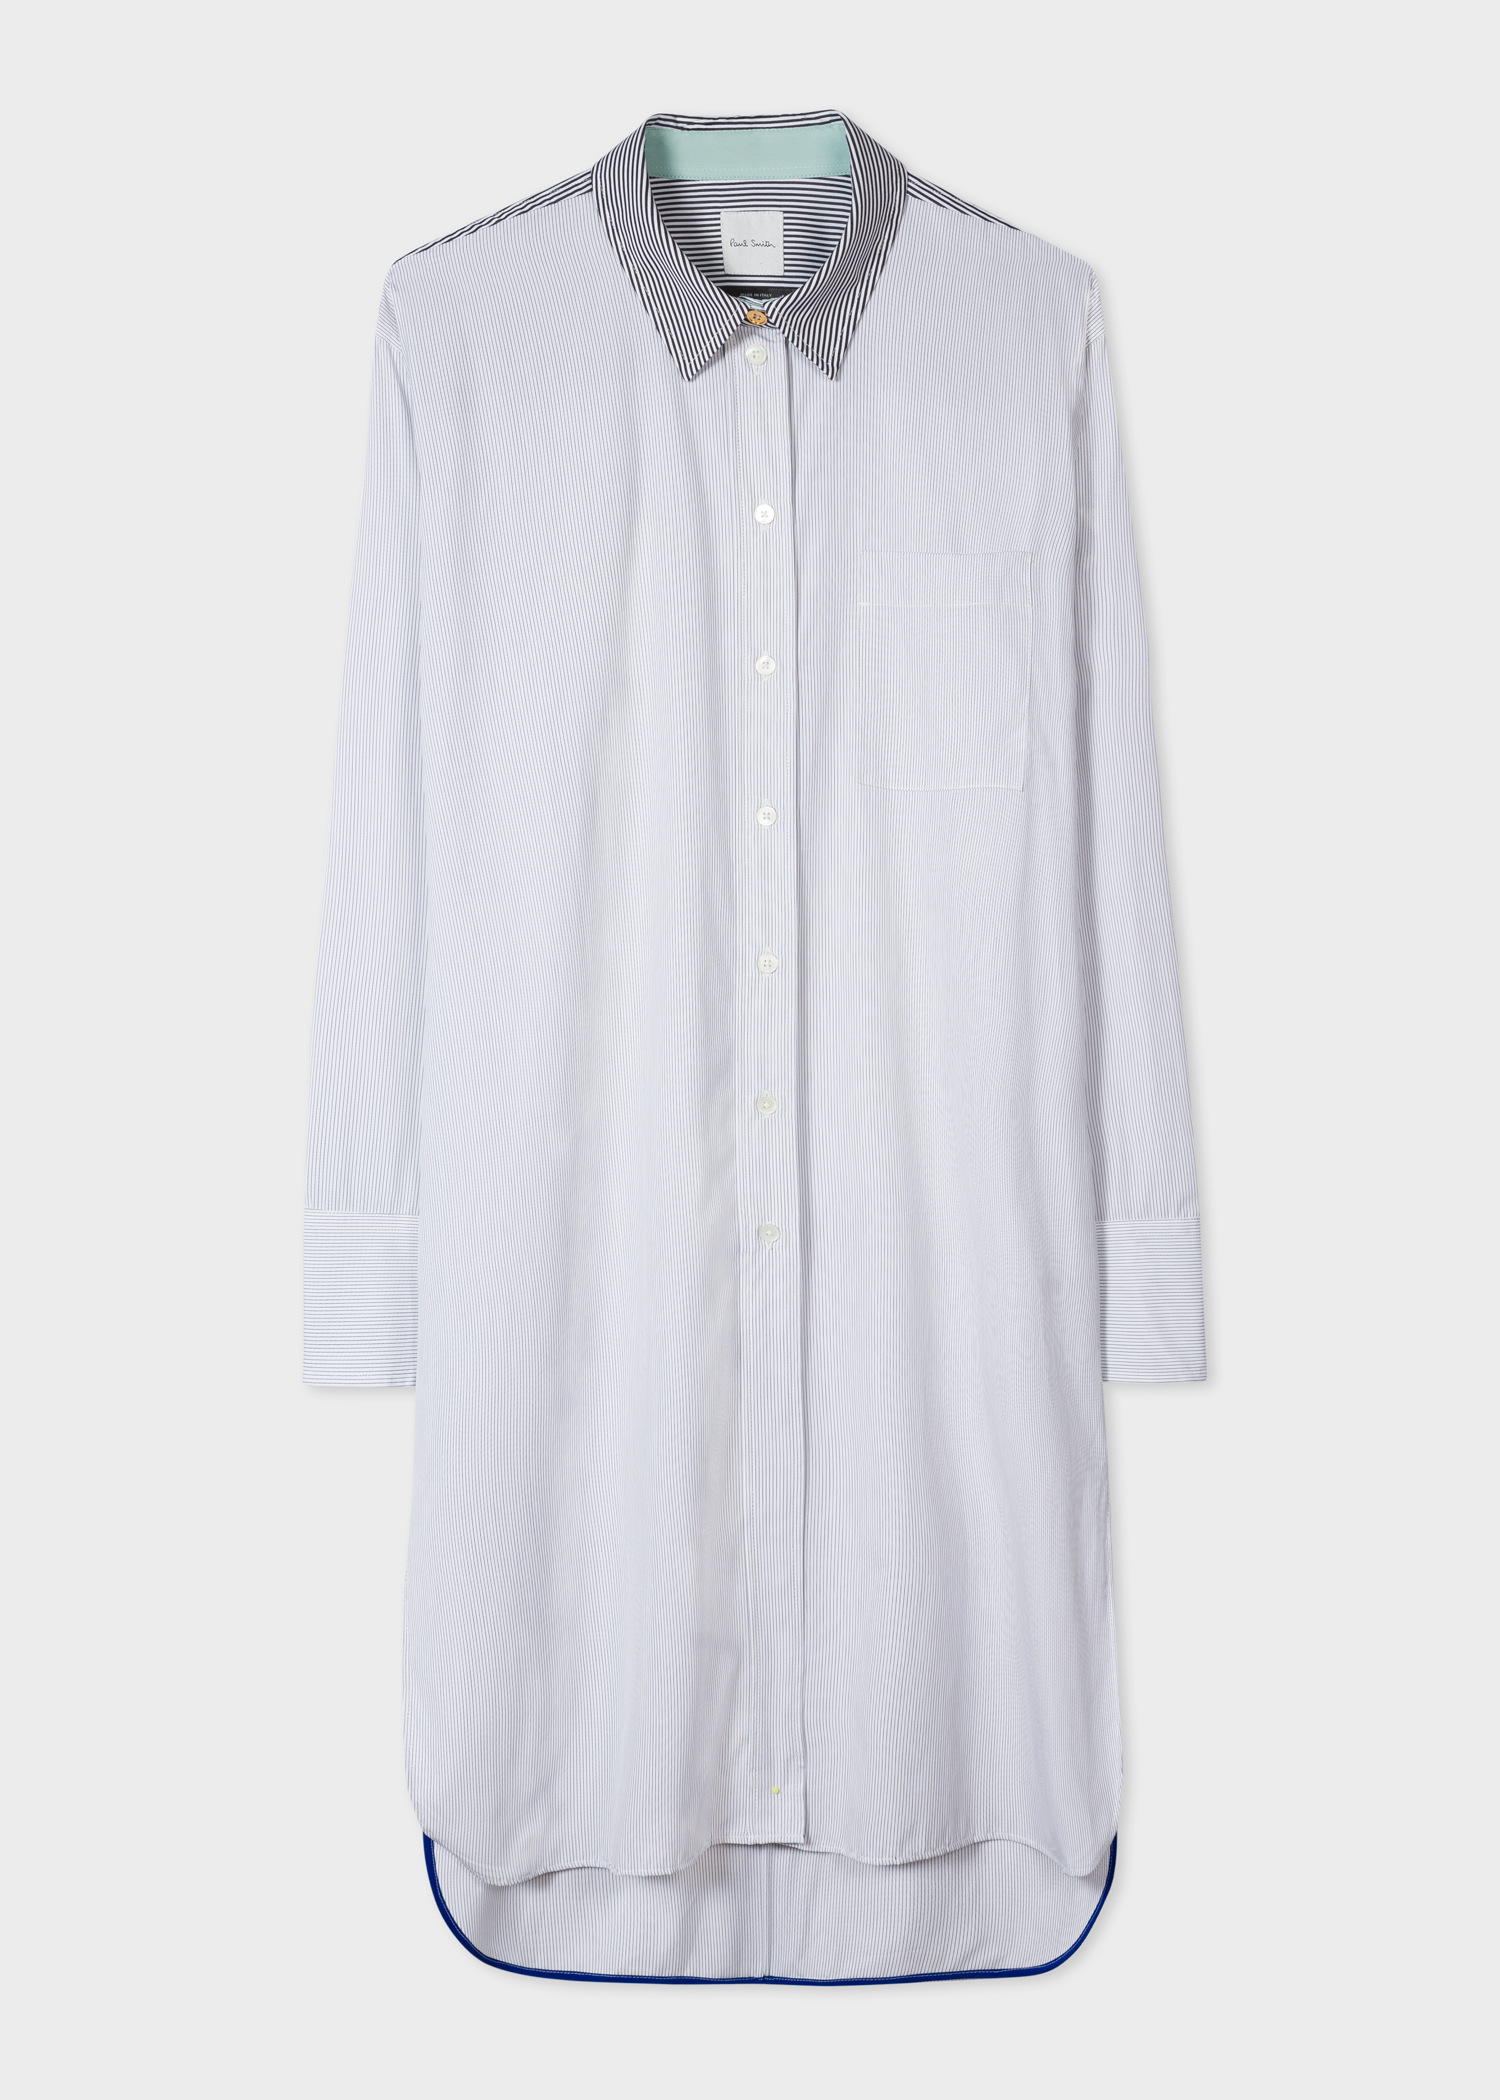 Front view - Women's Black And White Thin Stripe Long Cotton Shirt Paul Smith